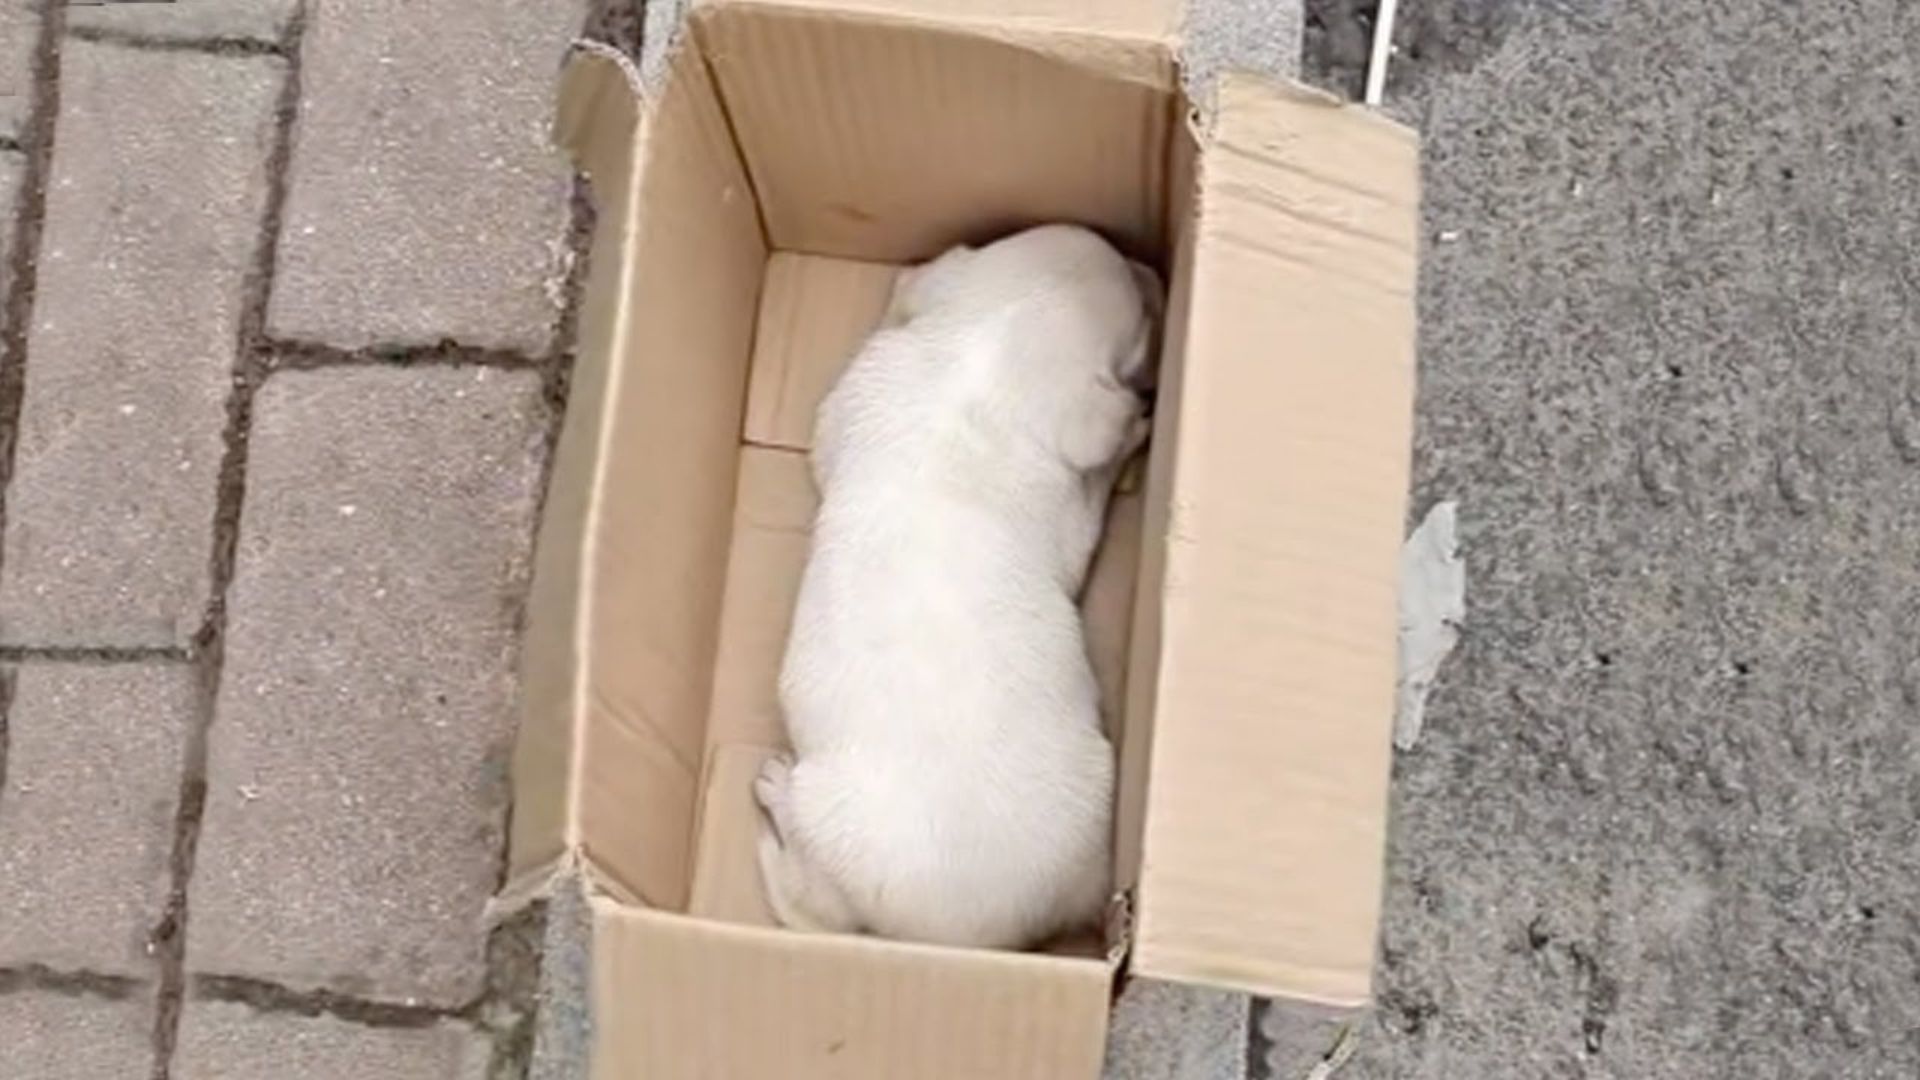 Kind Man Notices A Shivering Puppy In A Cardboard Box And Rushes To Help Him